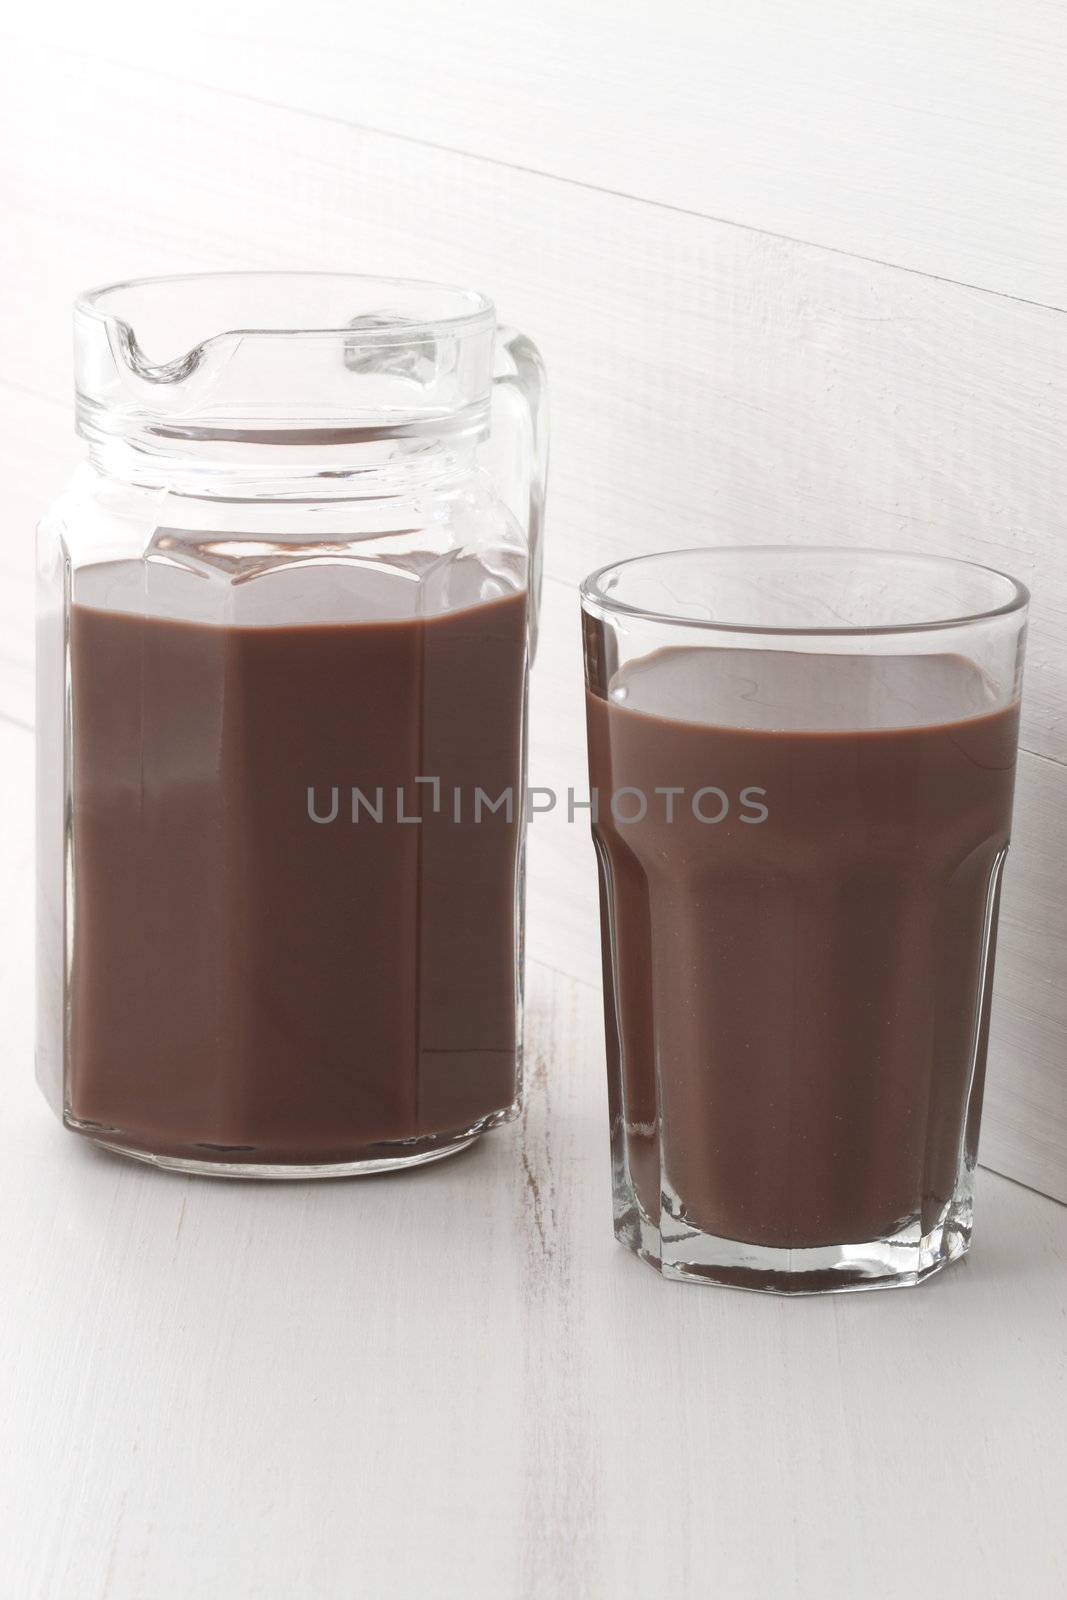 Delicious, nutritious and fresh Chocolate milk pint, made with organic real cocoa mass